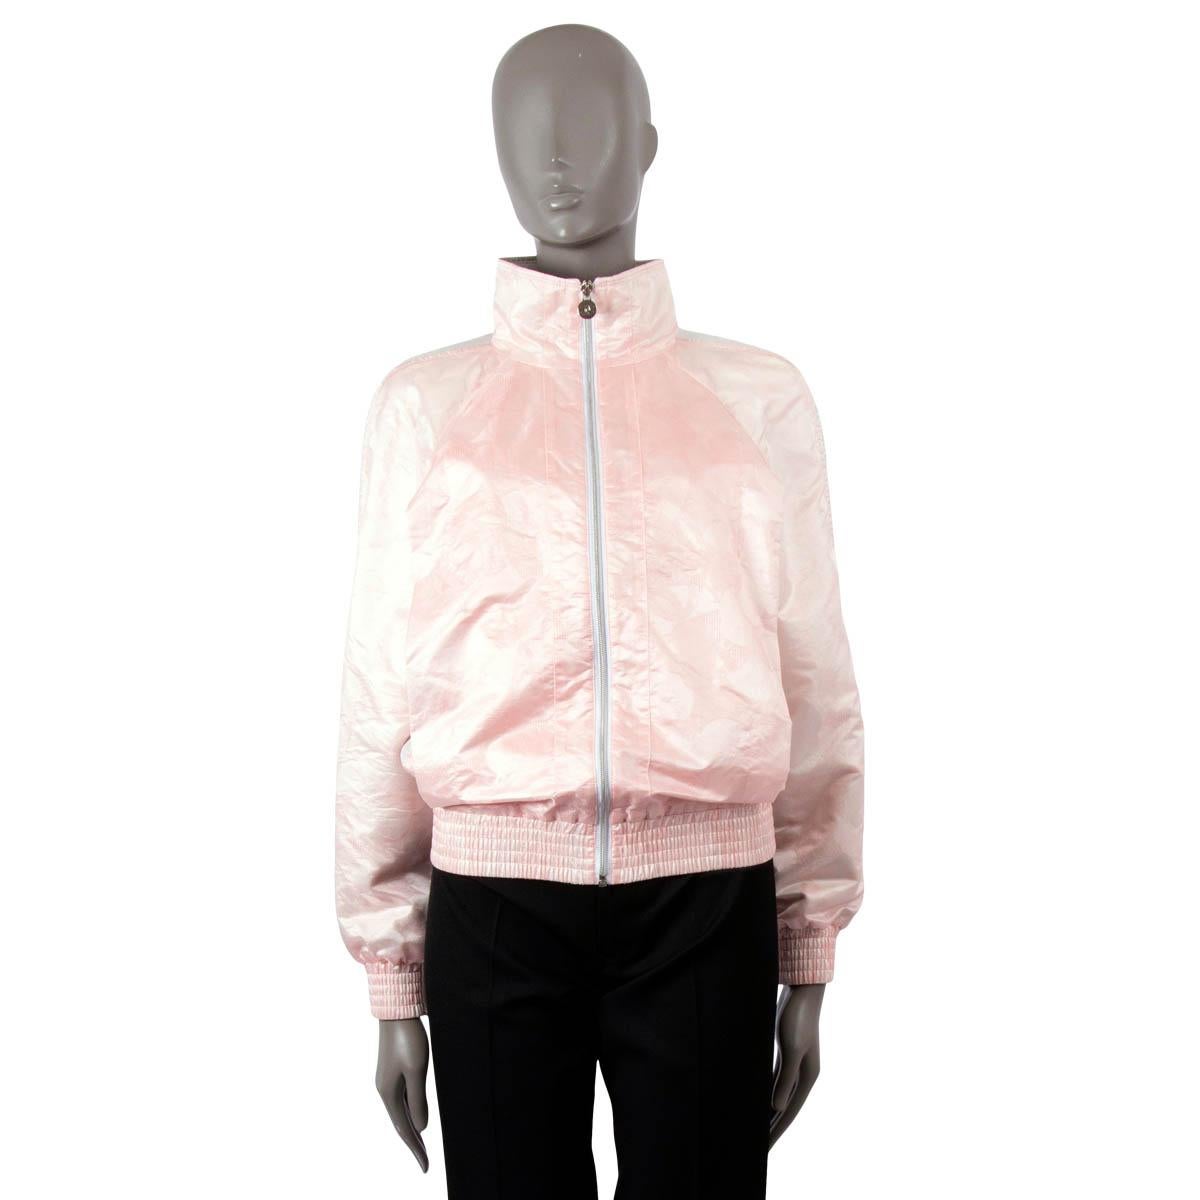 100% authentic Chanel bomber jacket in pink Camellia jacquard toile nylon (68%) and silk (32%). Features raglan sleeves (sleeve measurement take from the neck) with a silver mesh stripe on the sleeves, elastic cuffs and hem. Closes with a zipper on